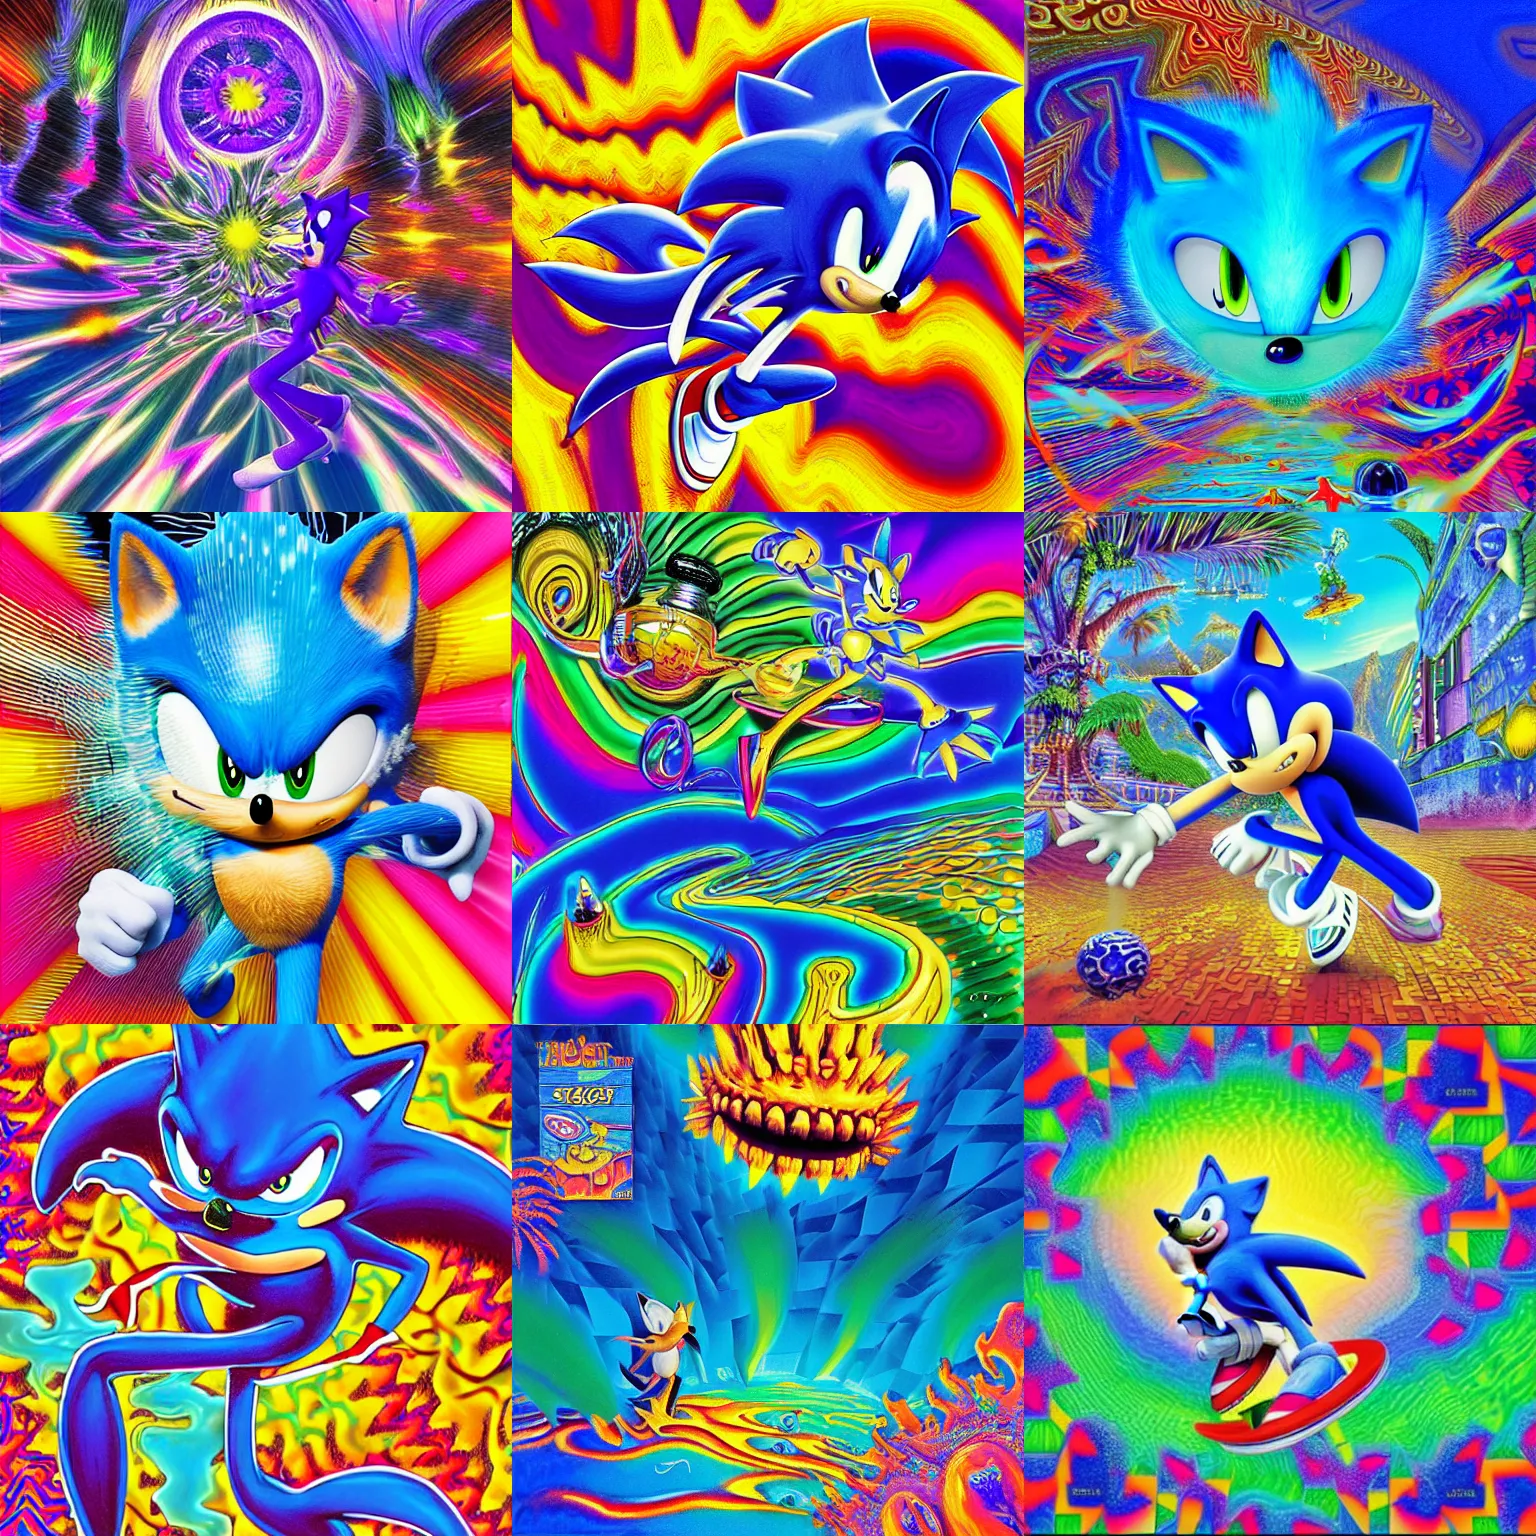 Prompt: surreal, sonic, sharp, deepdream detailed professional, high quality airbrush art MGMT album cover of a liquid dissolving LSD DMT blue sonic the hedgehog surfing through cyberspace, tropical ocean, purple checkerboard background, 1980s 1985 arcade video game album cover